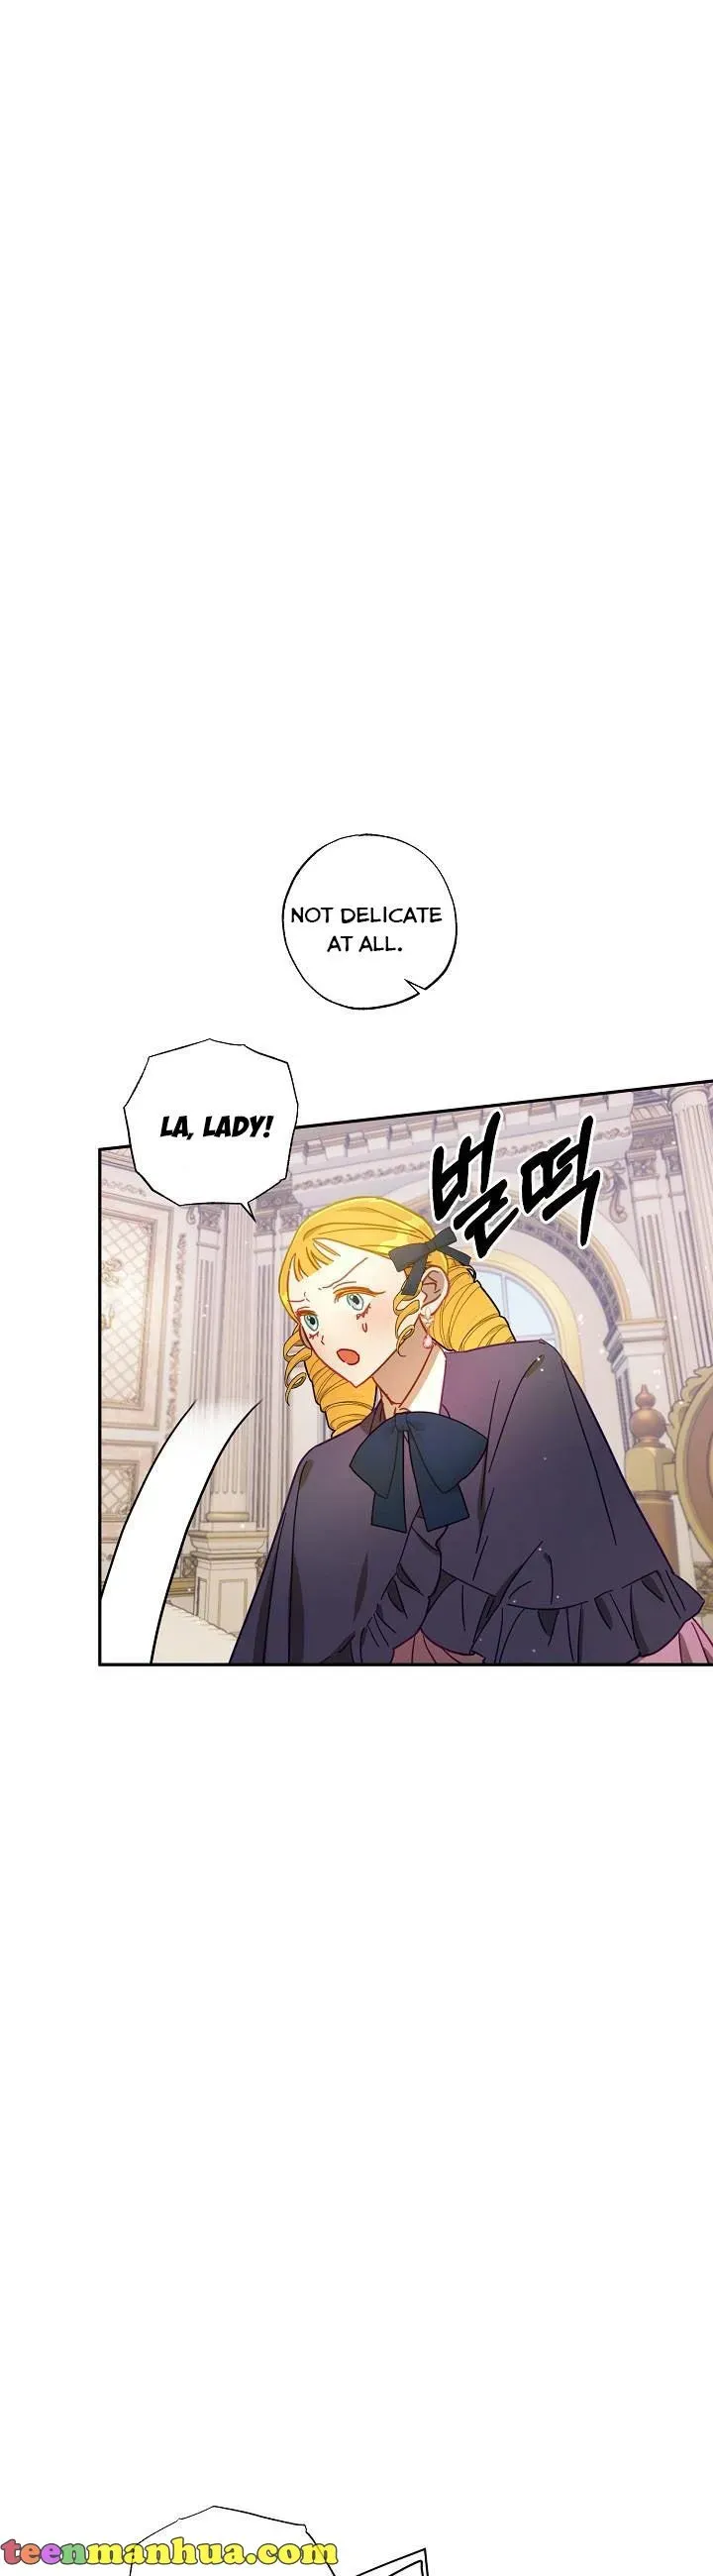 I am Afraid I have Failed to Divorce Chapter 43 page 7